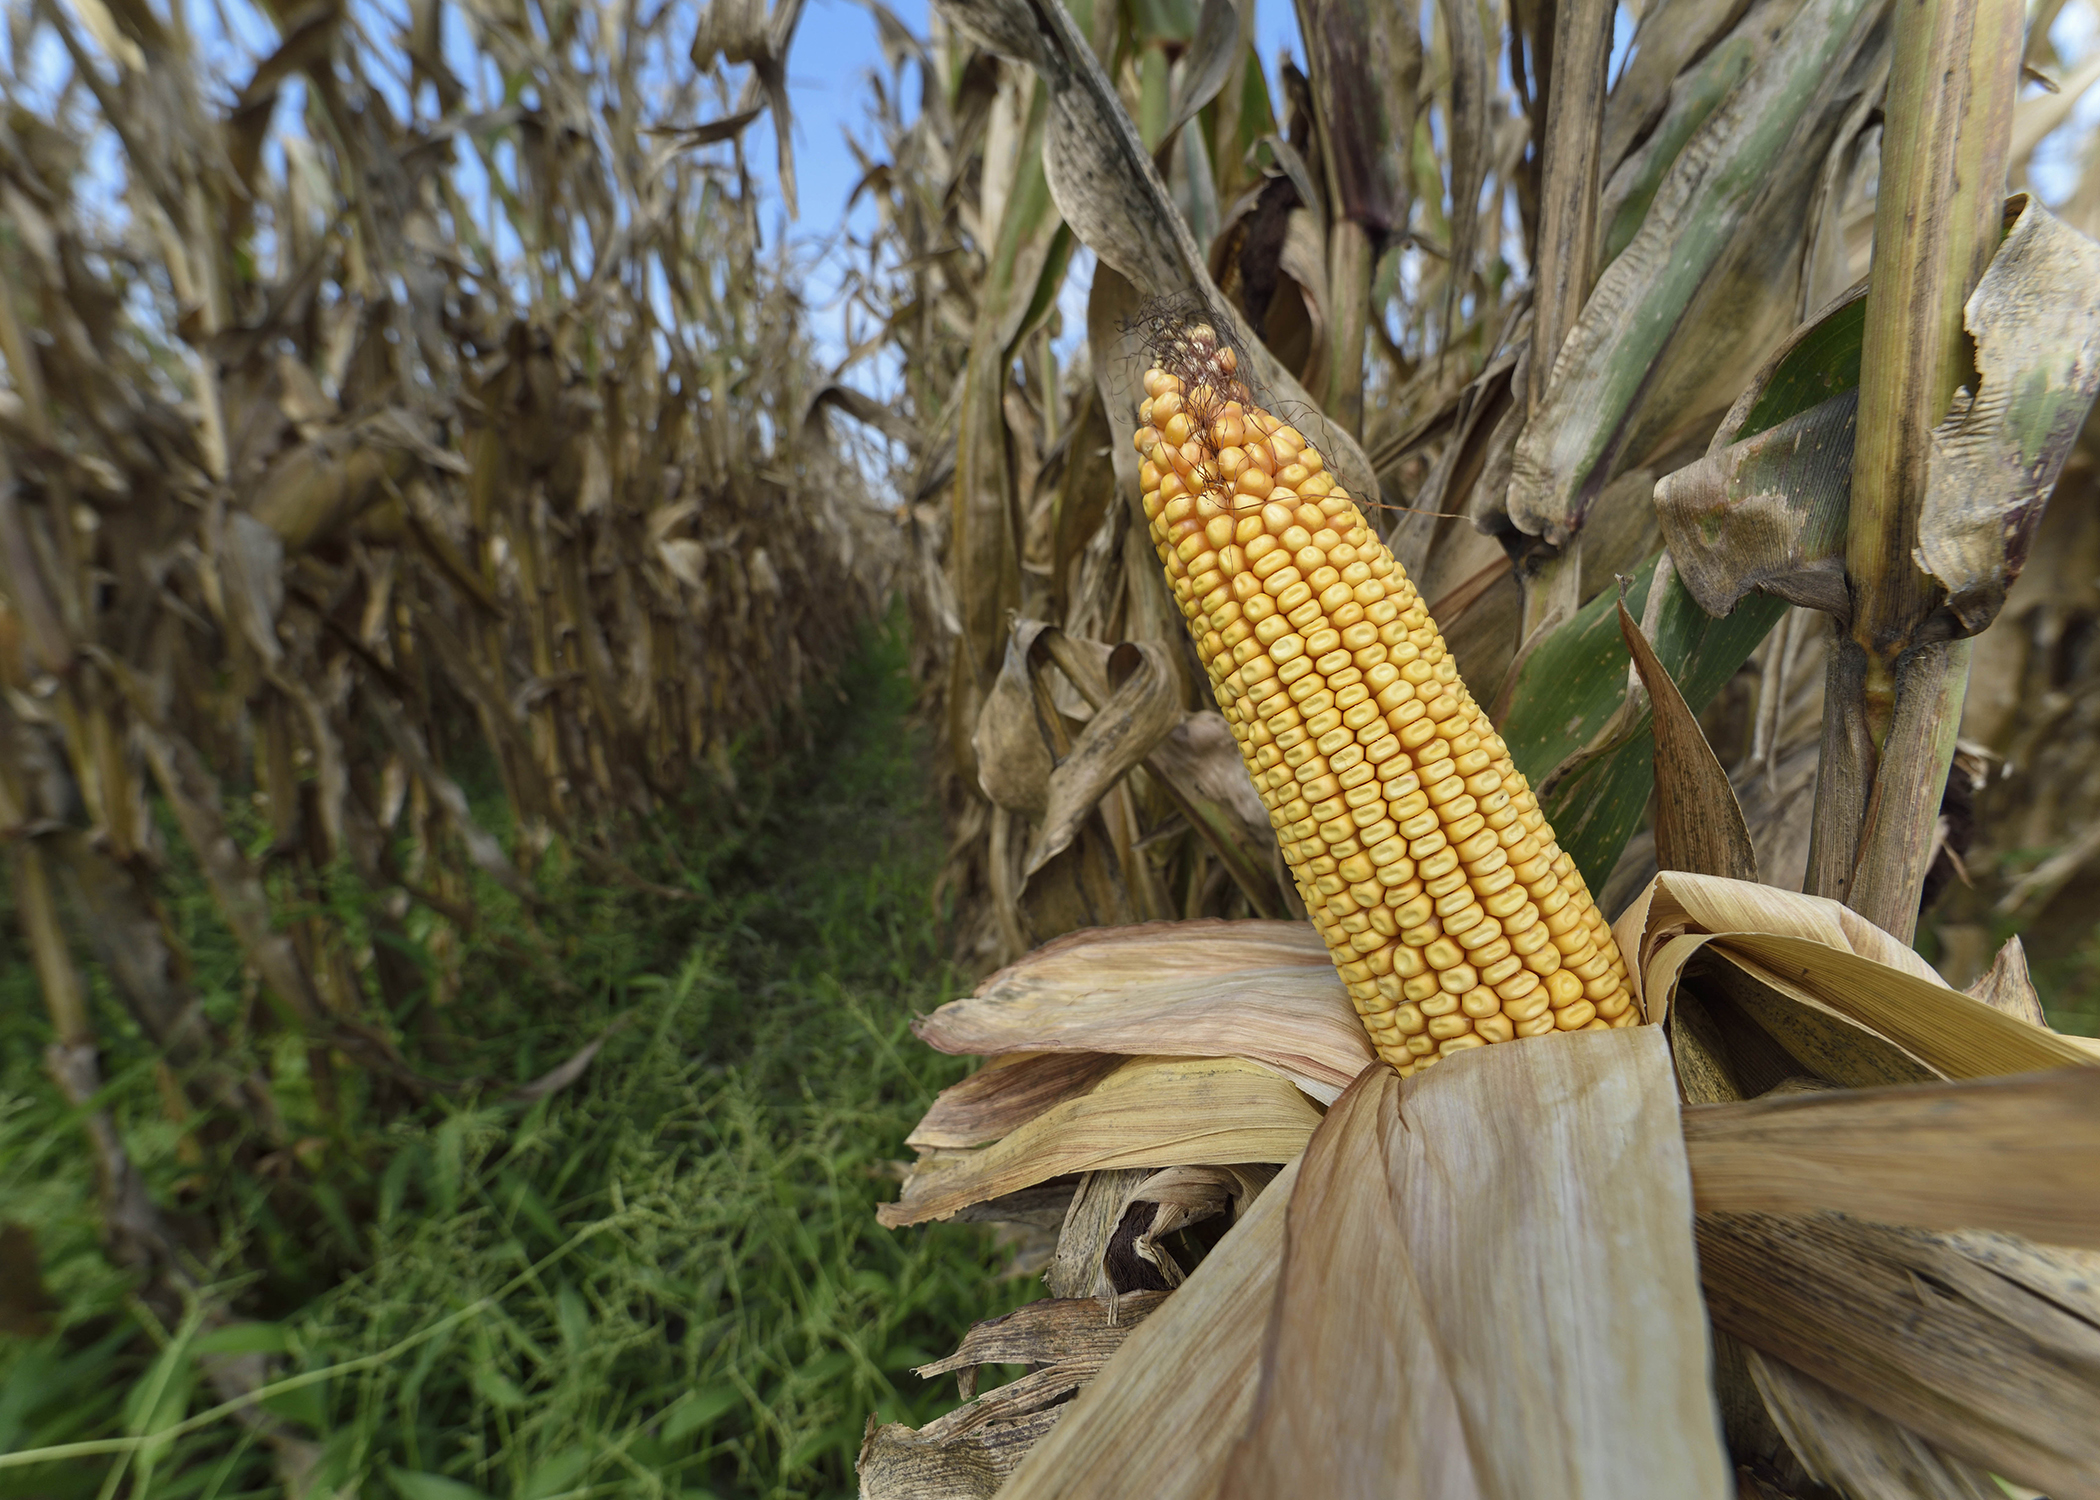 Corn harvest ahead of schedule, yields high  Mississippi State University  Extension Service